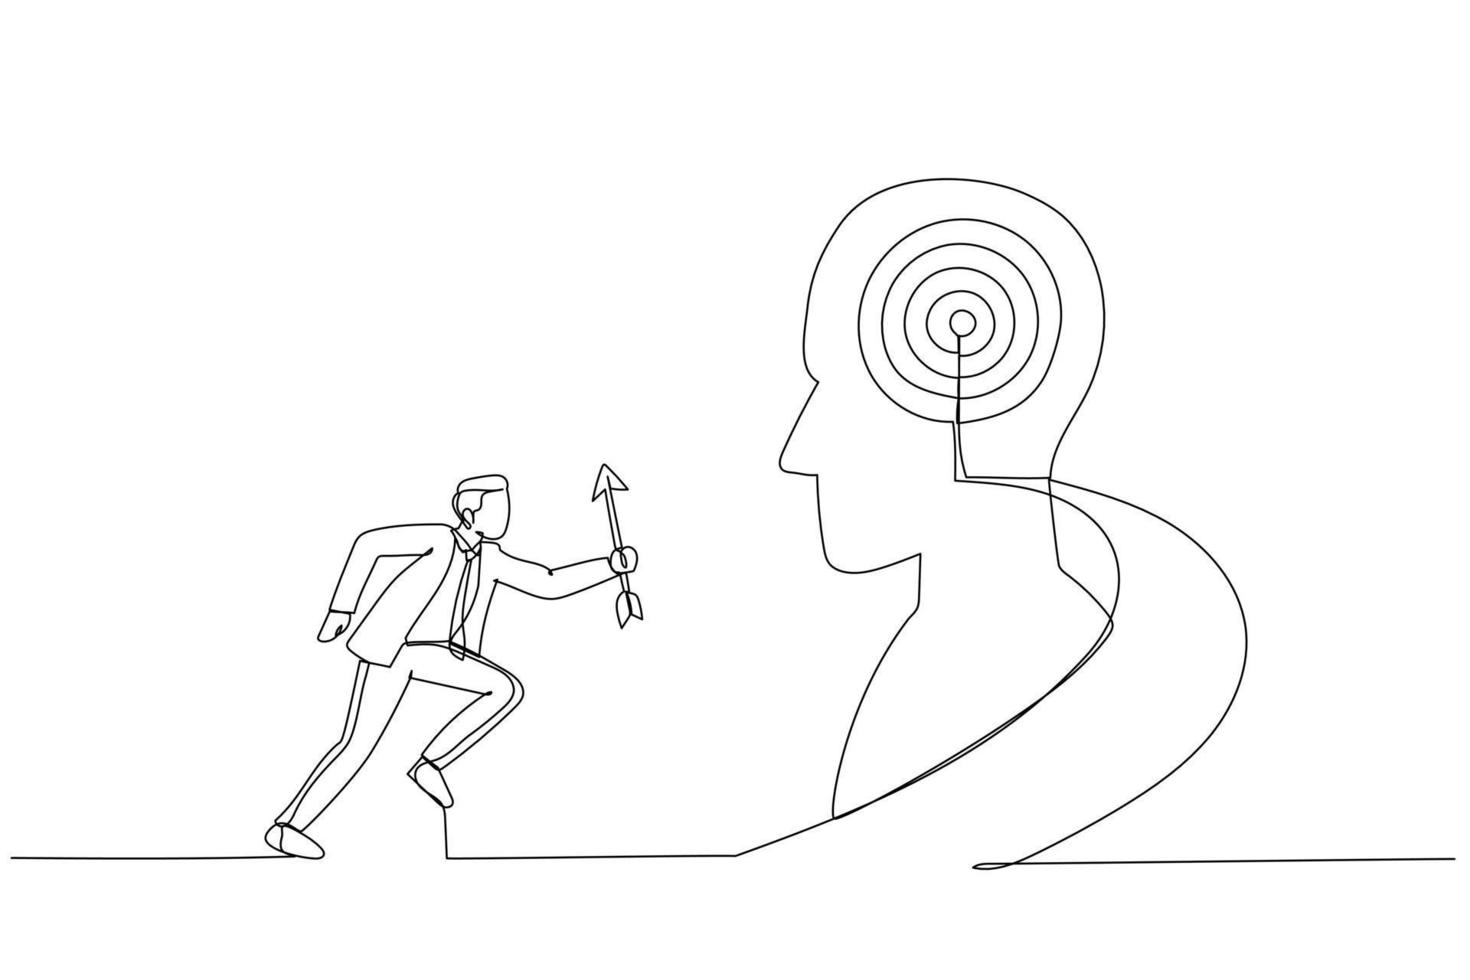 Illustration of businessman hold arrow running up stairway to the target on human head. Metaphor for growth, success, target, positioning. One line style art vector